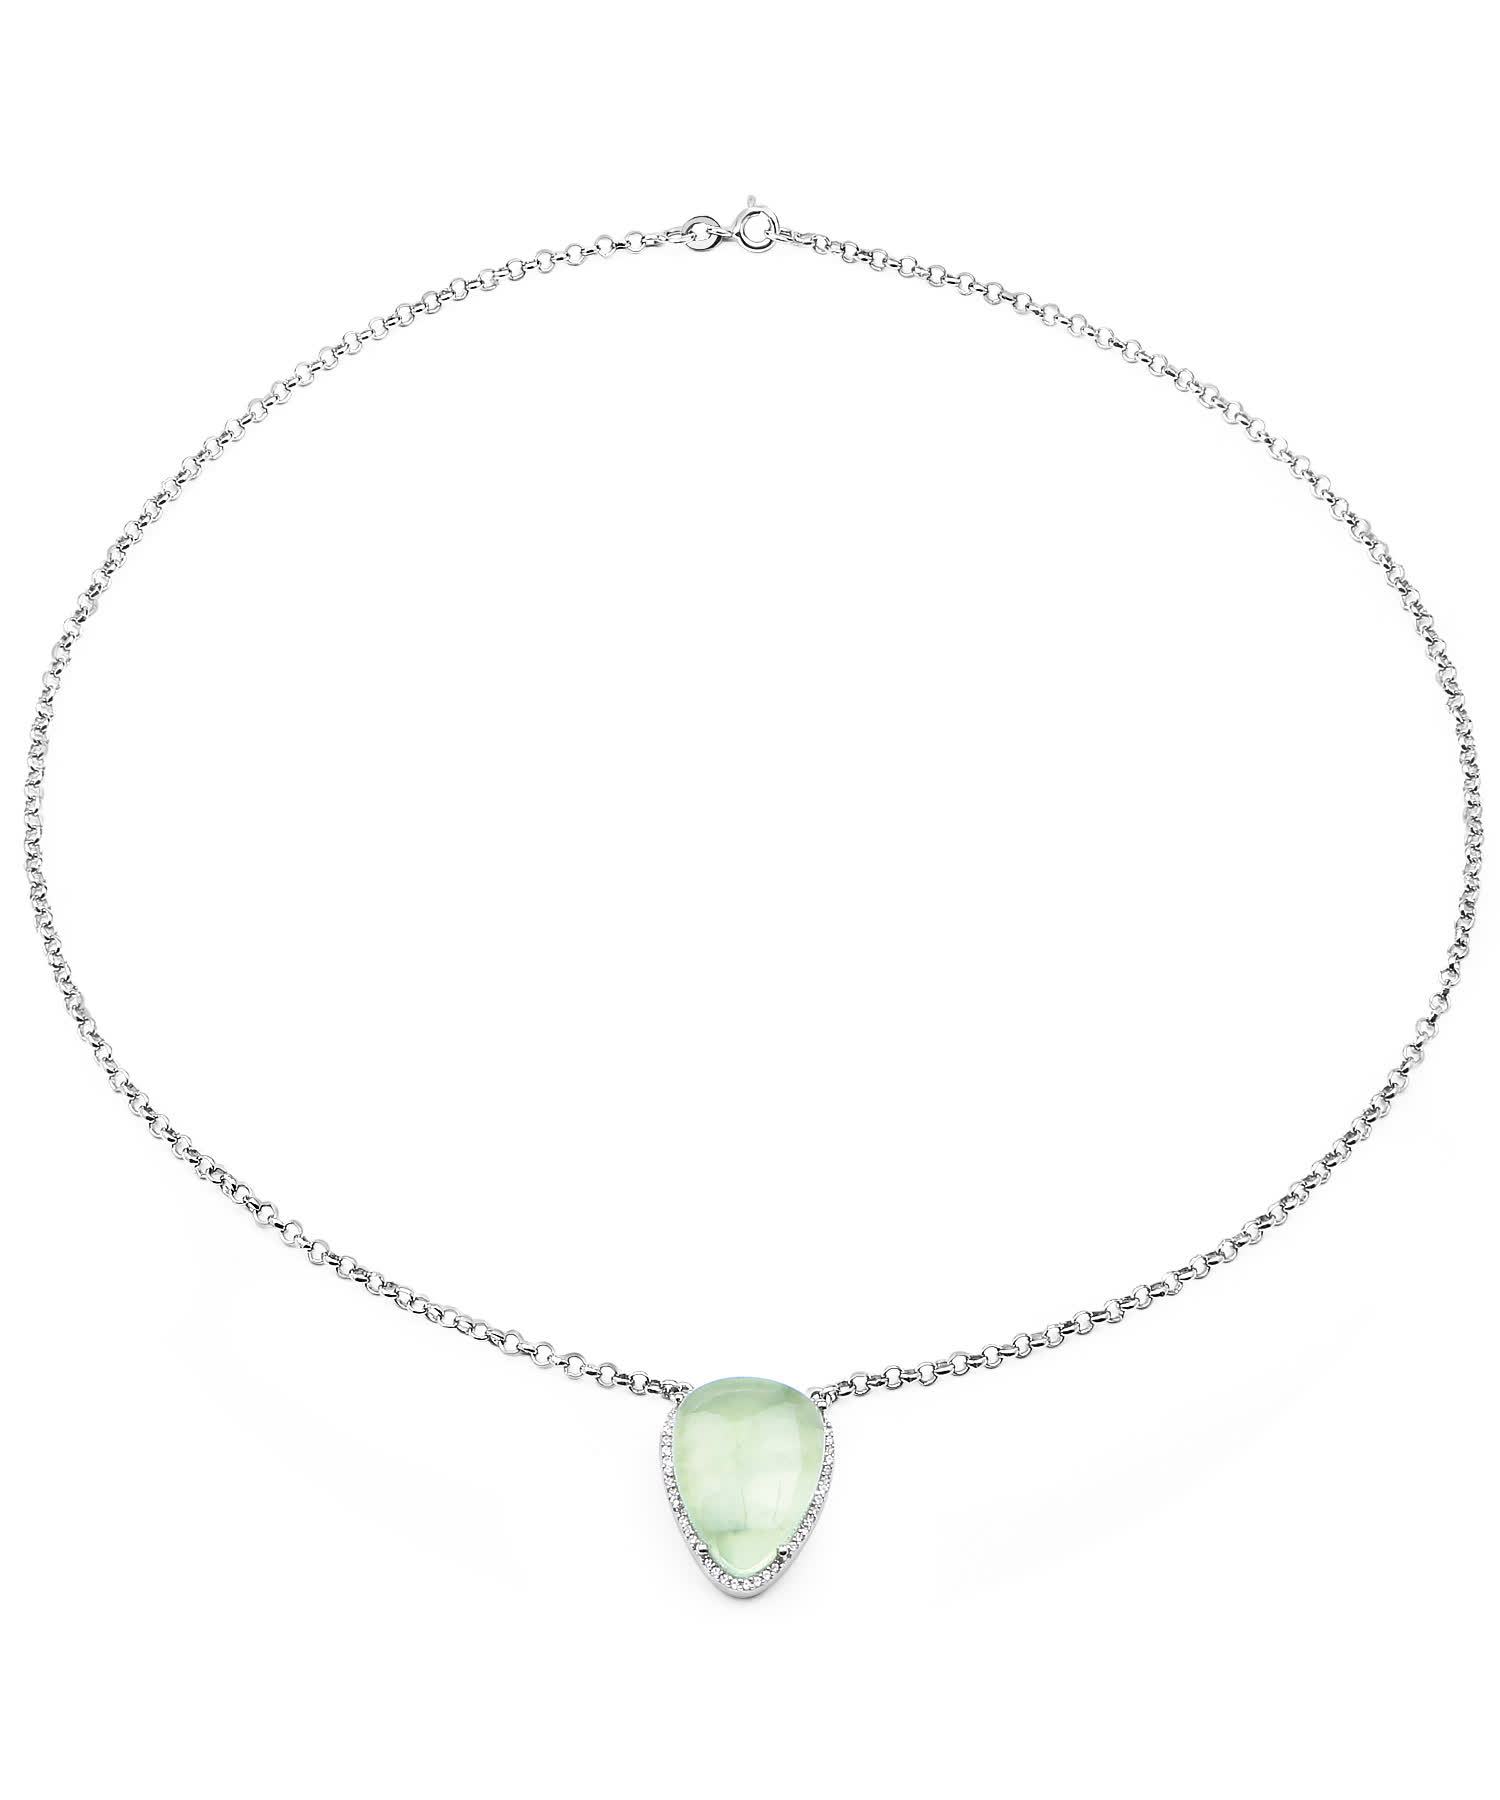 10.77ctw Natural Prehnite and Topaz Rhodium Plated 925 Sterling Silver Drop Necklace View 2